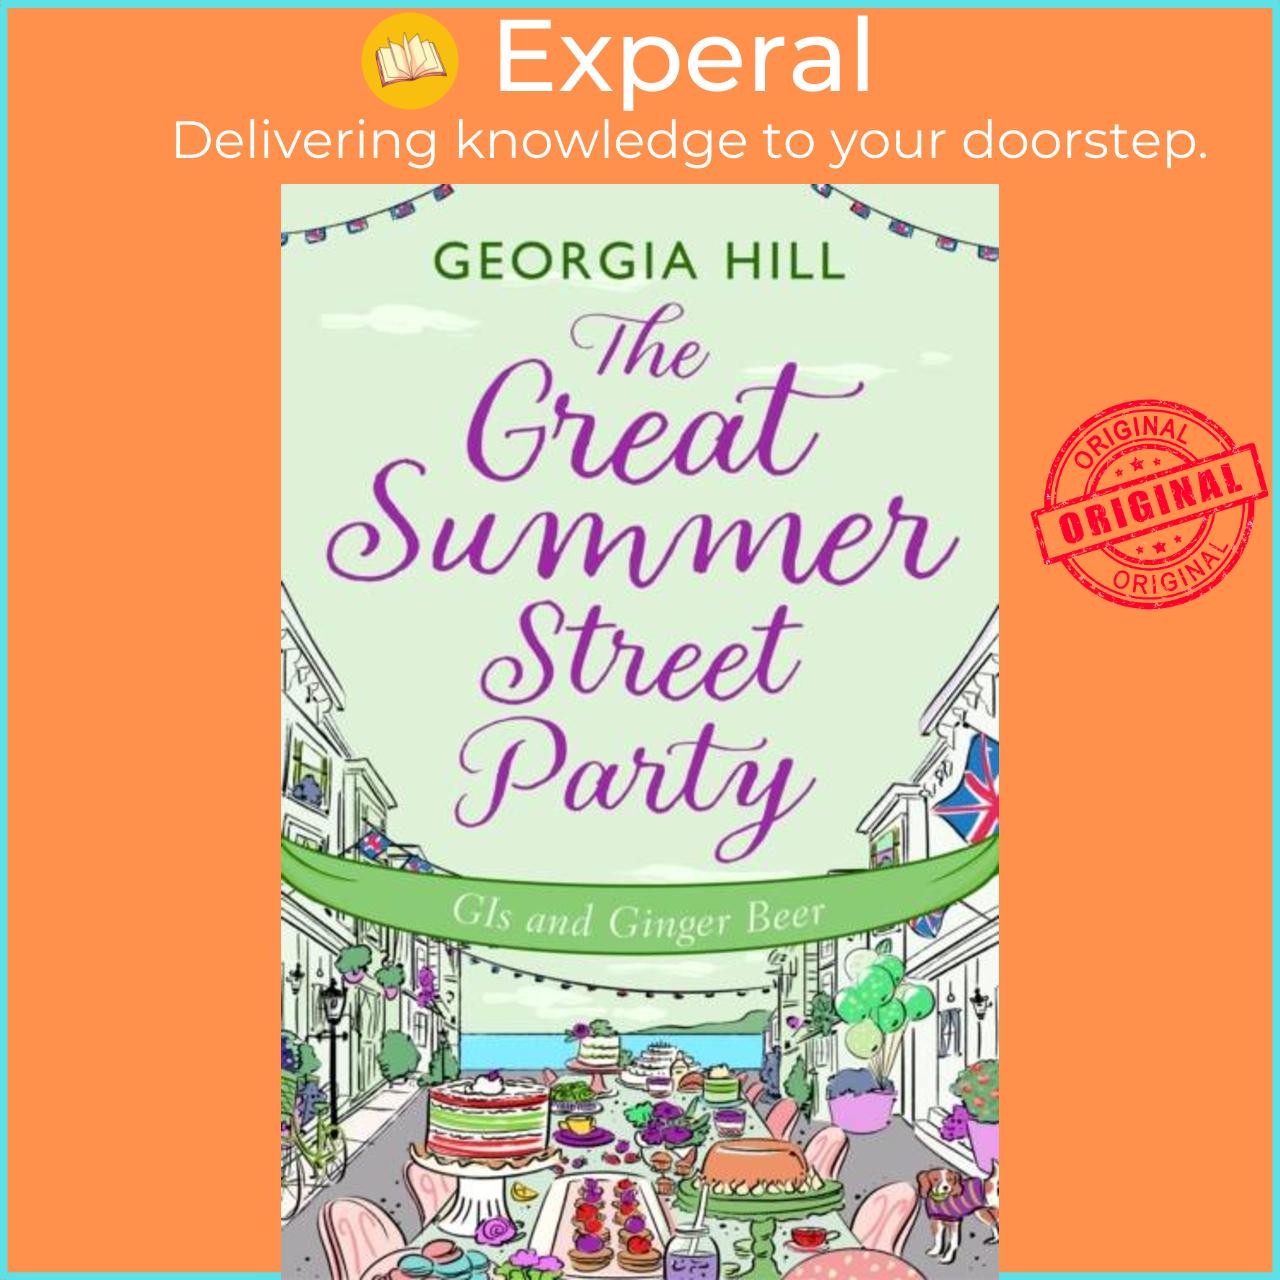 Sách - The Great Summer Street Party Part 2: GIs and Ginger Beer by Georgia Hill (UK edition, paperback)